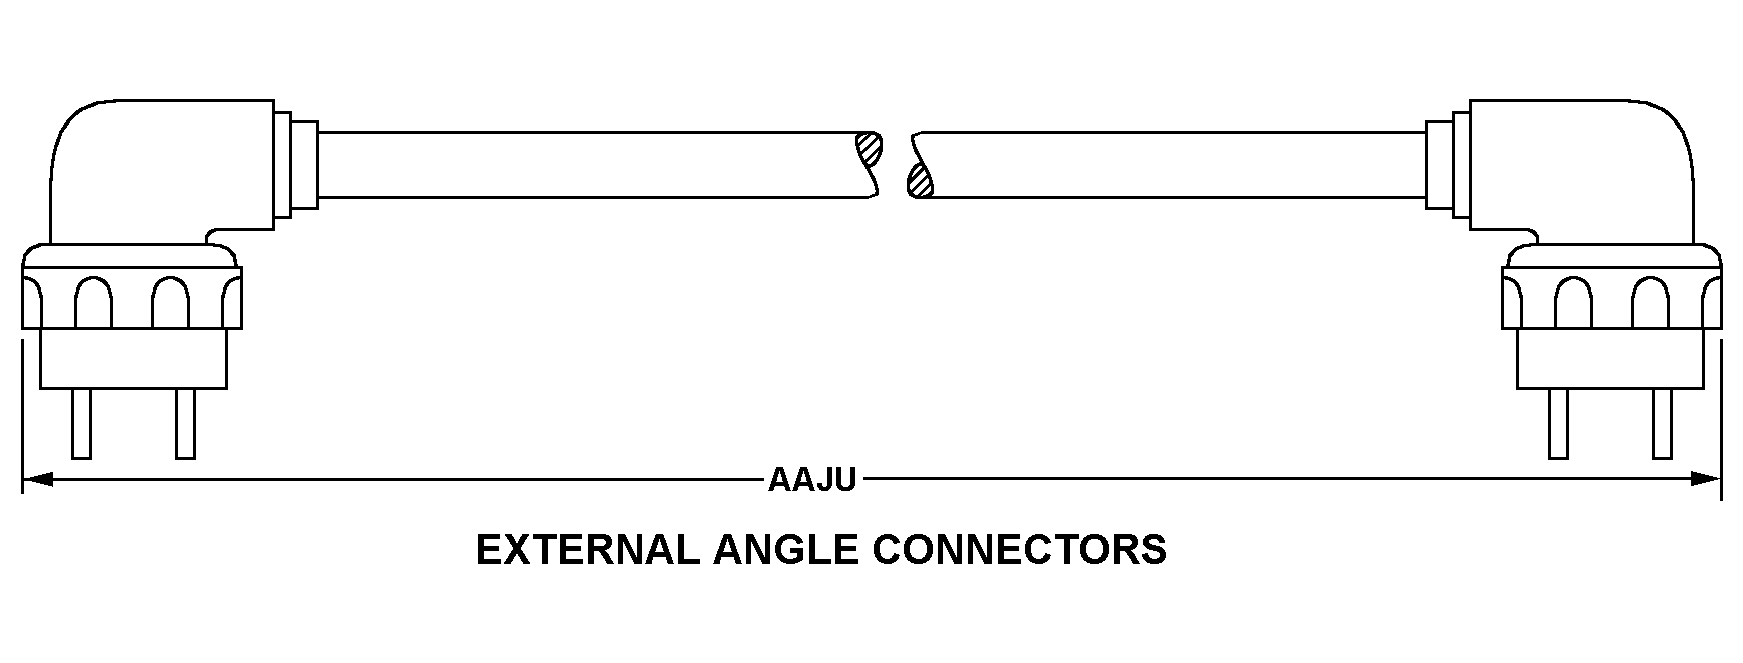 EXTERNAL ANGLE CONNECTORS style nsn 6150-01-298-8475